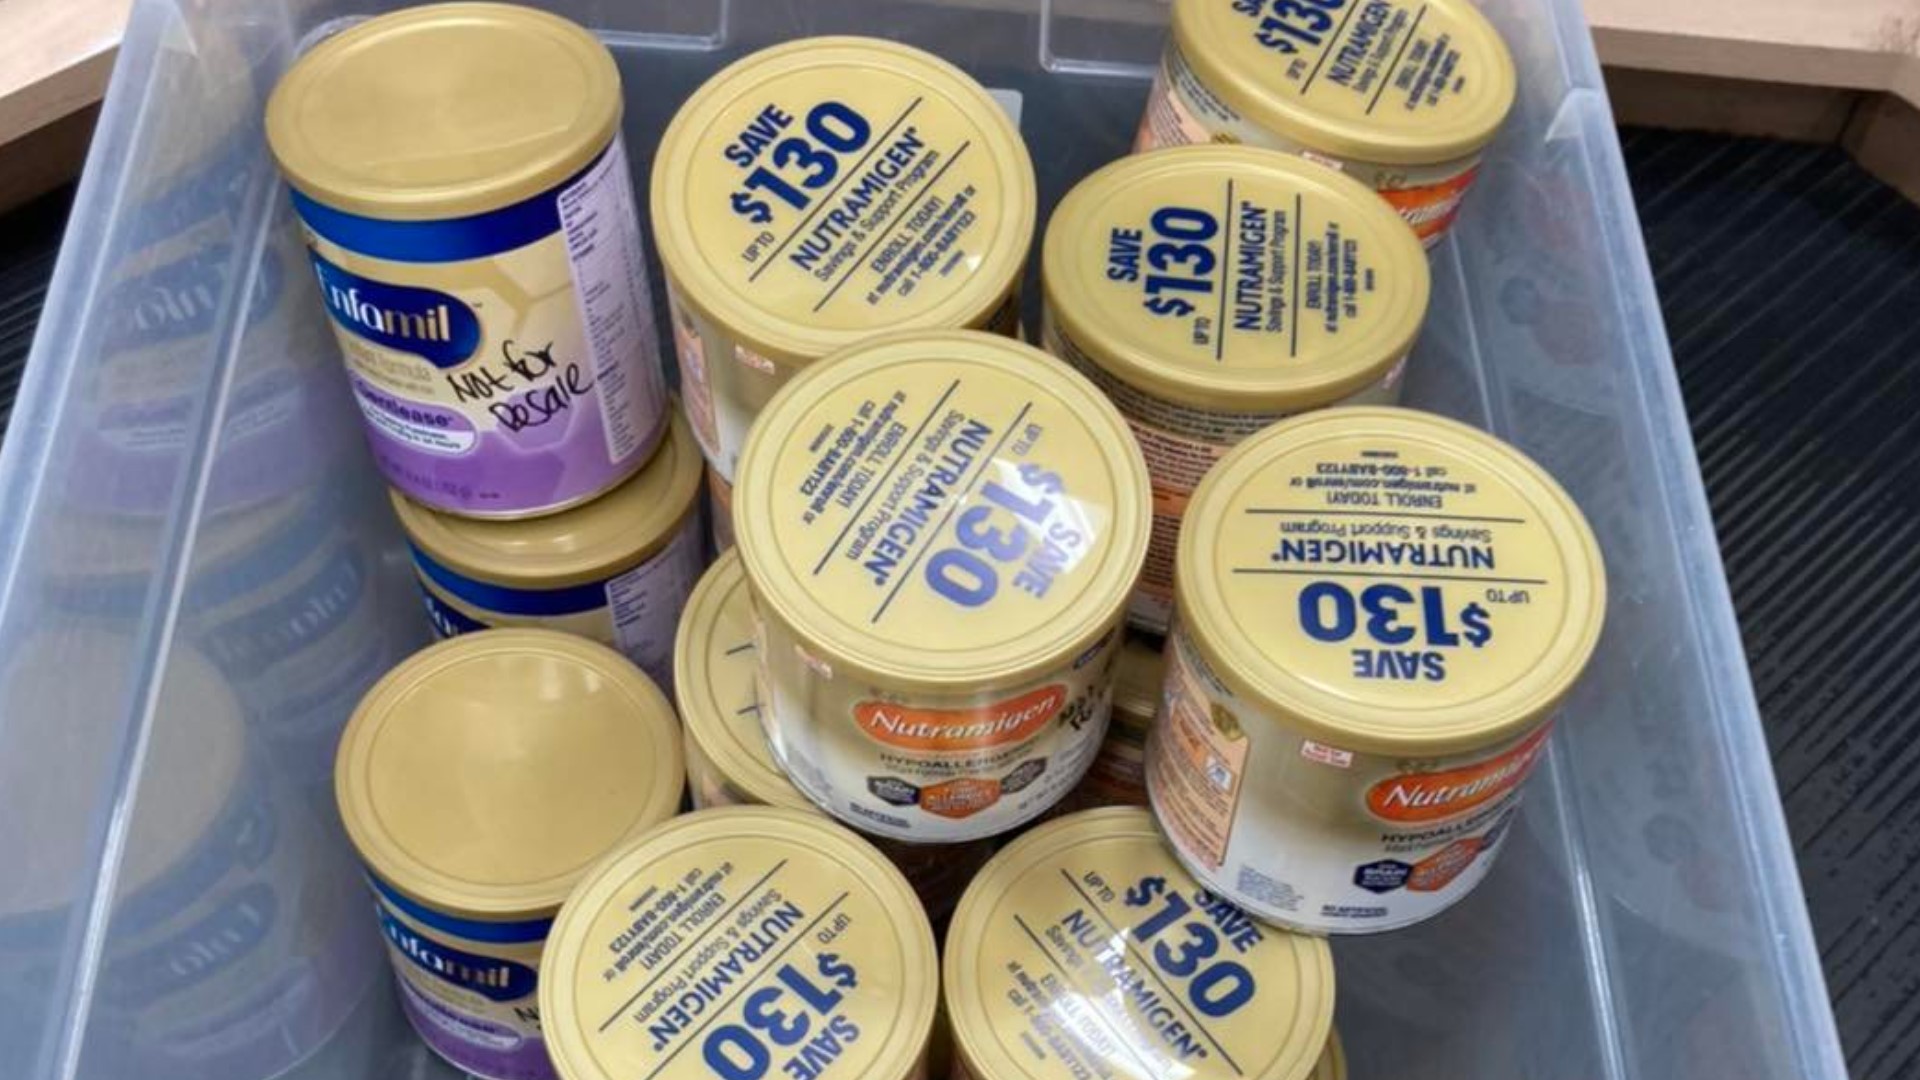 Kid to Kid is donating baby formula to mothers in need, Sara Wilson gets you all the information you need.